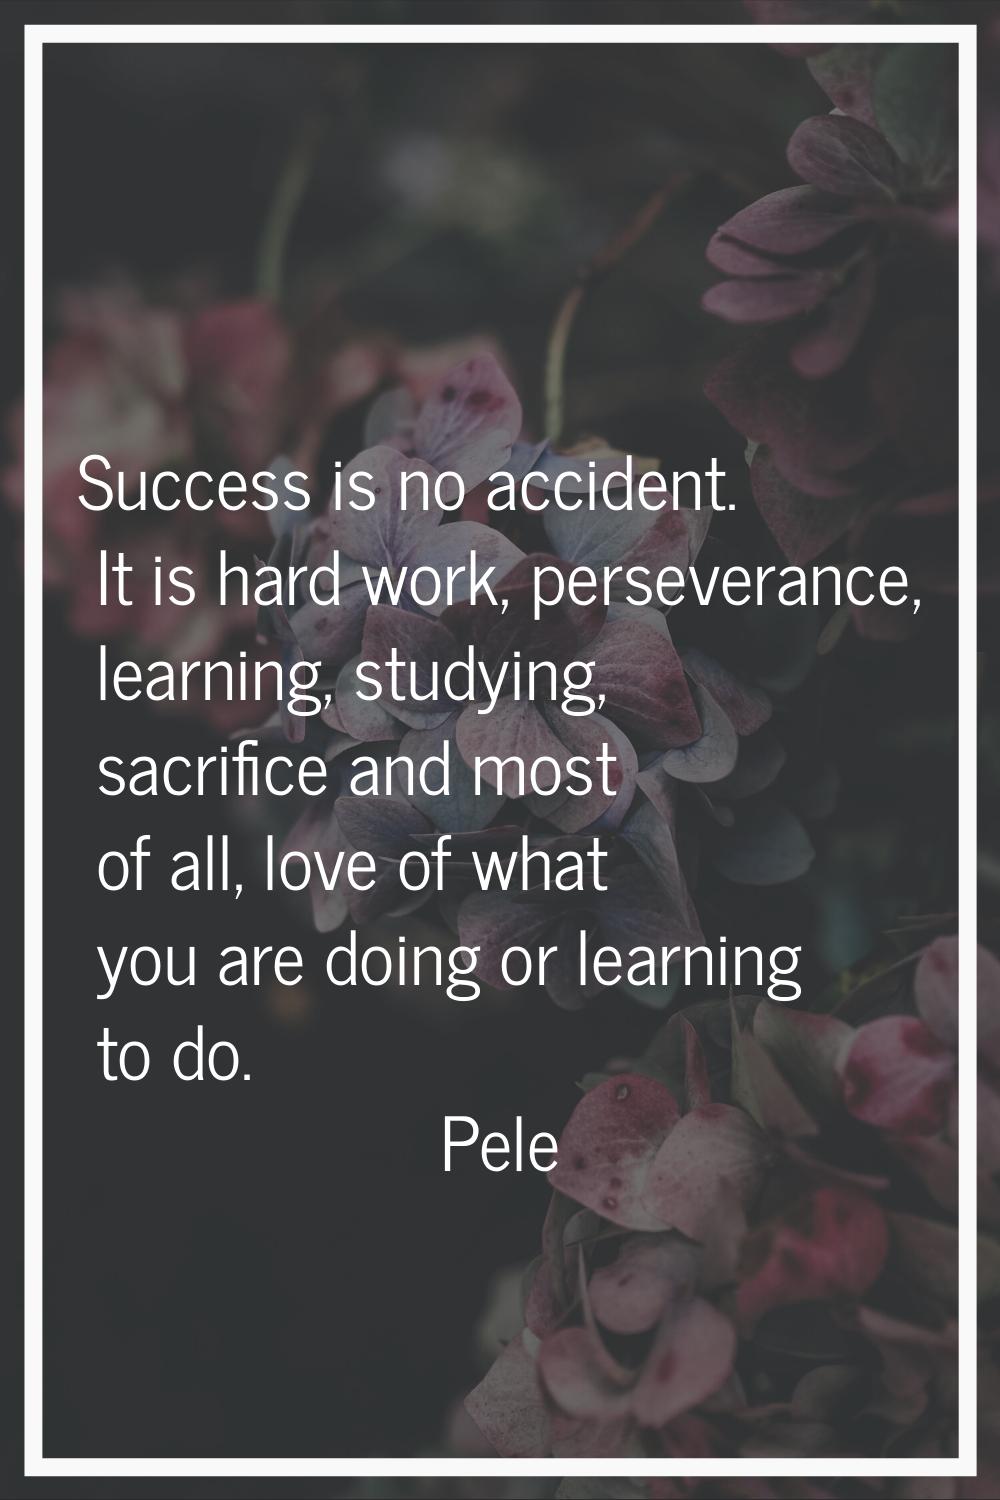 Success is no accident. It is hard work, perseverance, learning, studying, sacrifice and most of al